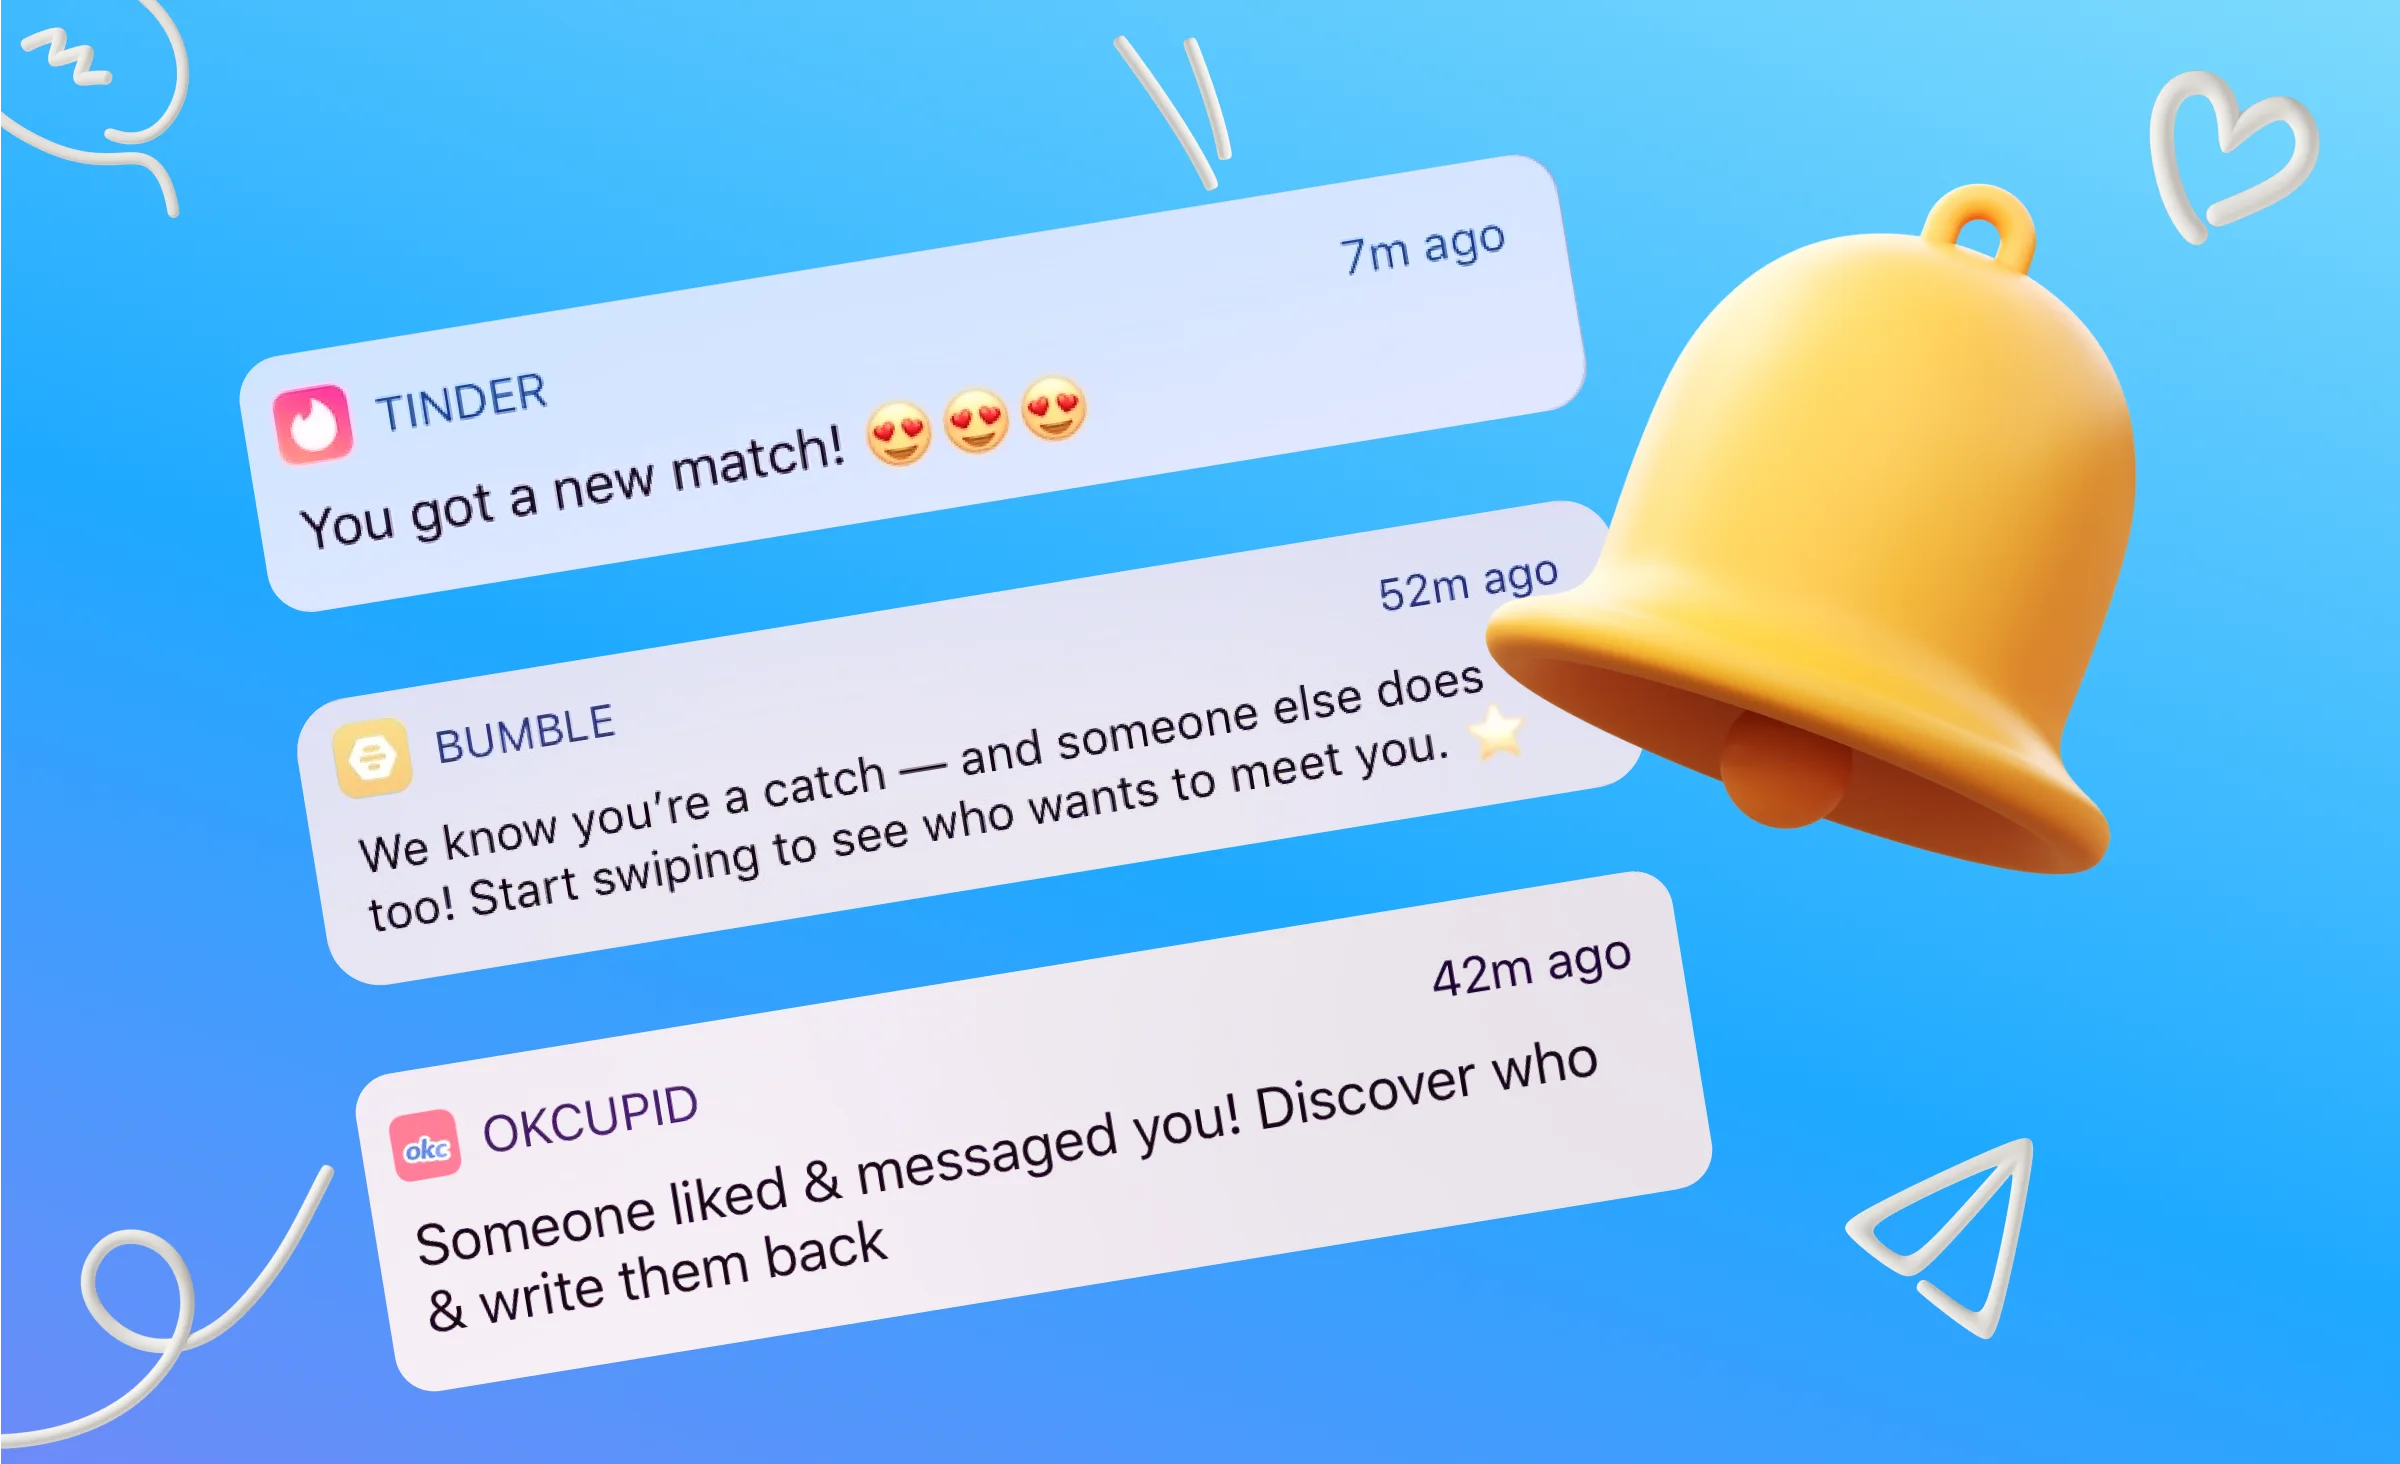 how to make an app like tinder: notifications